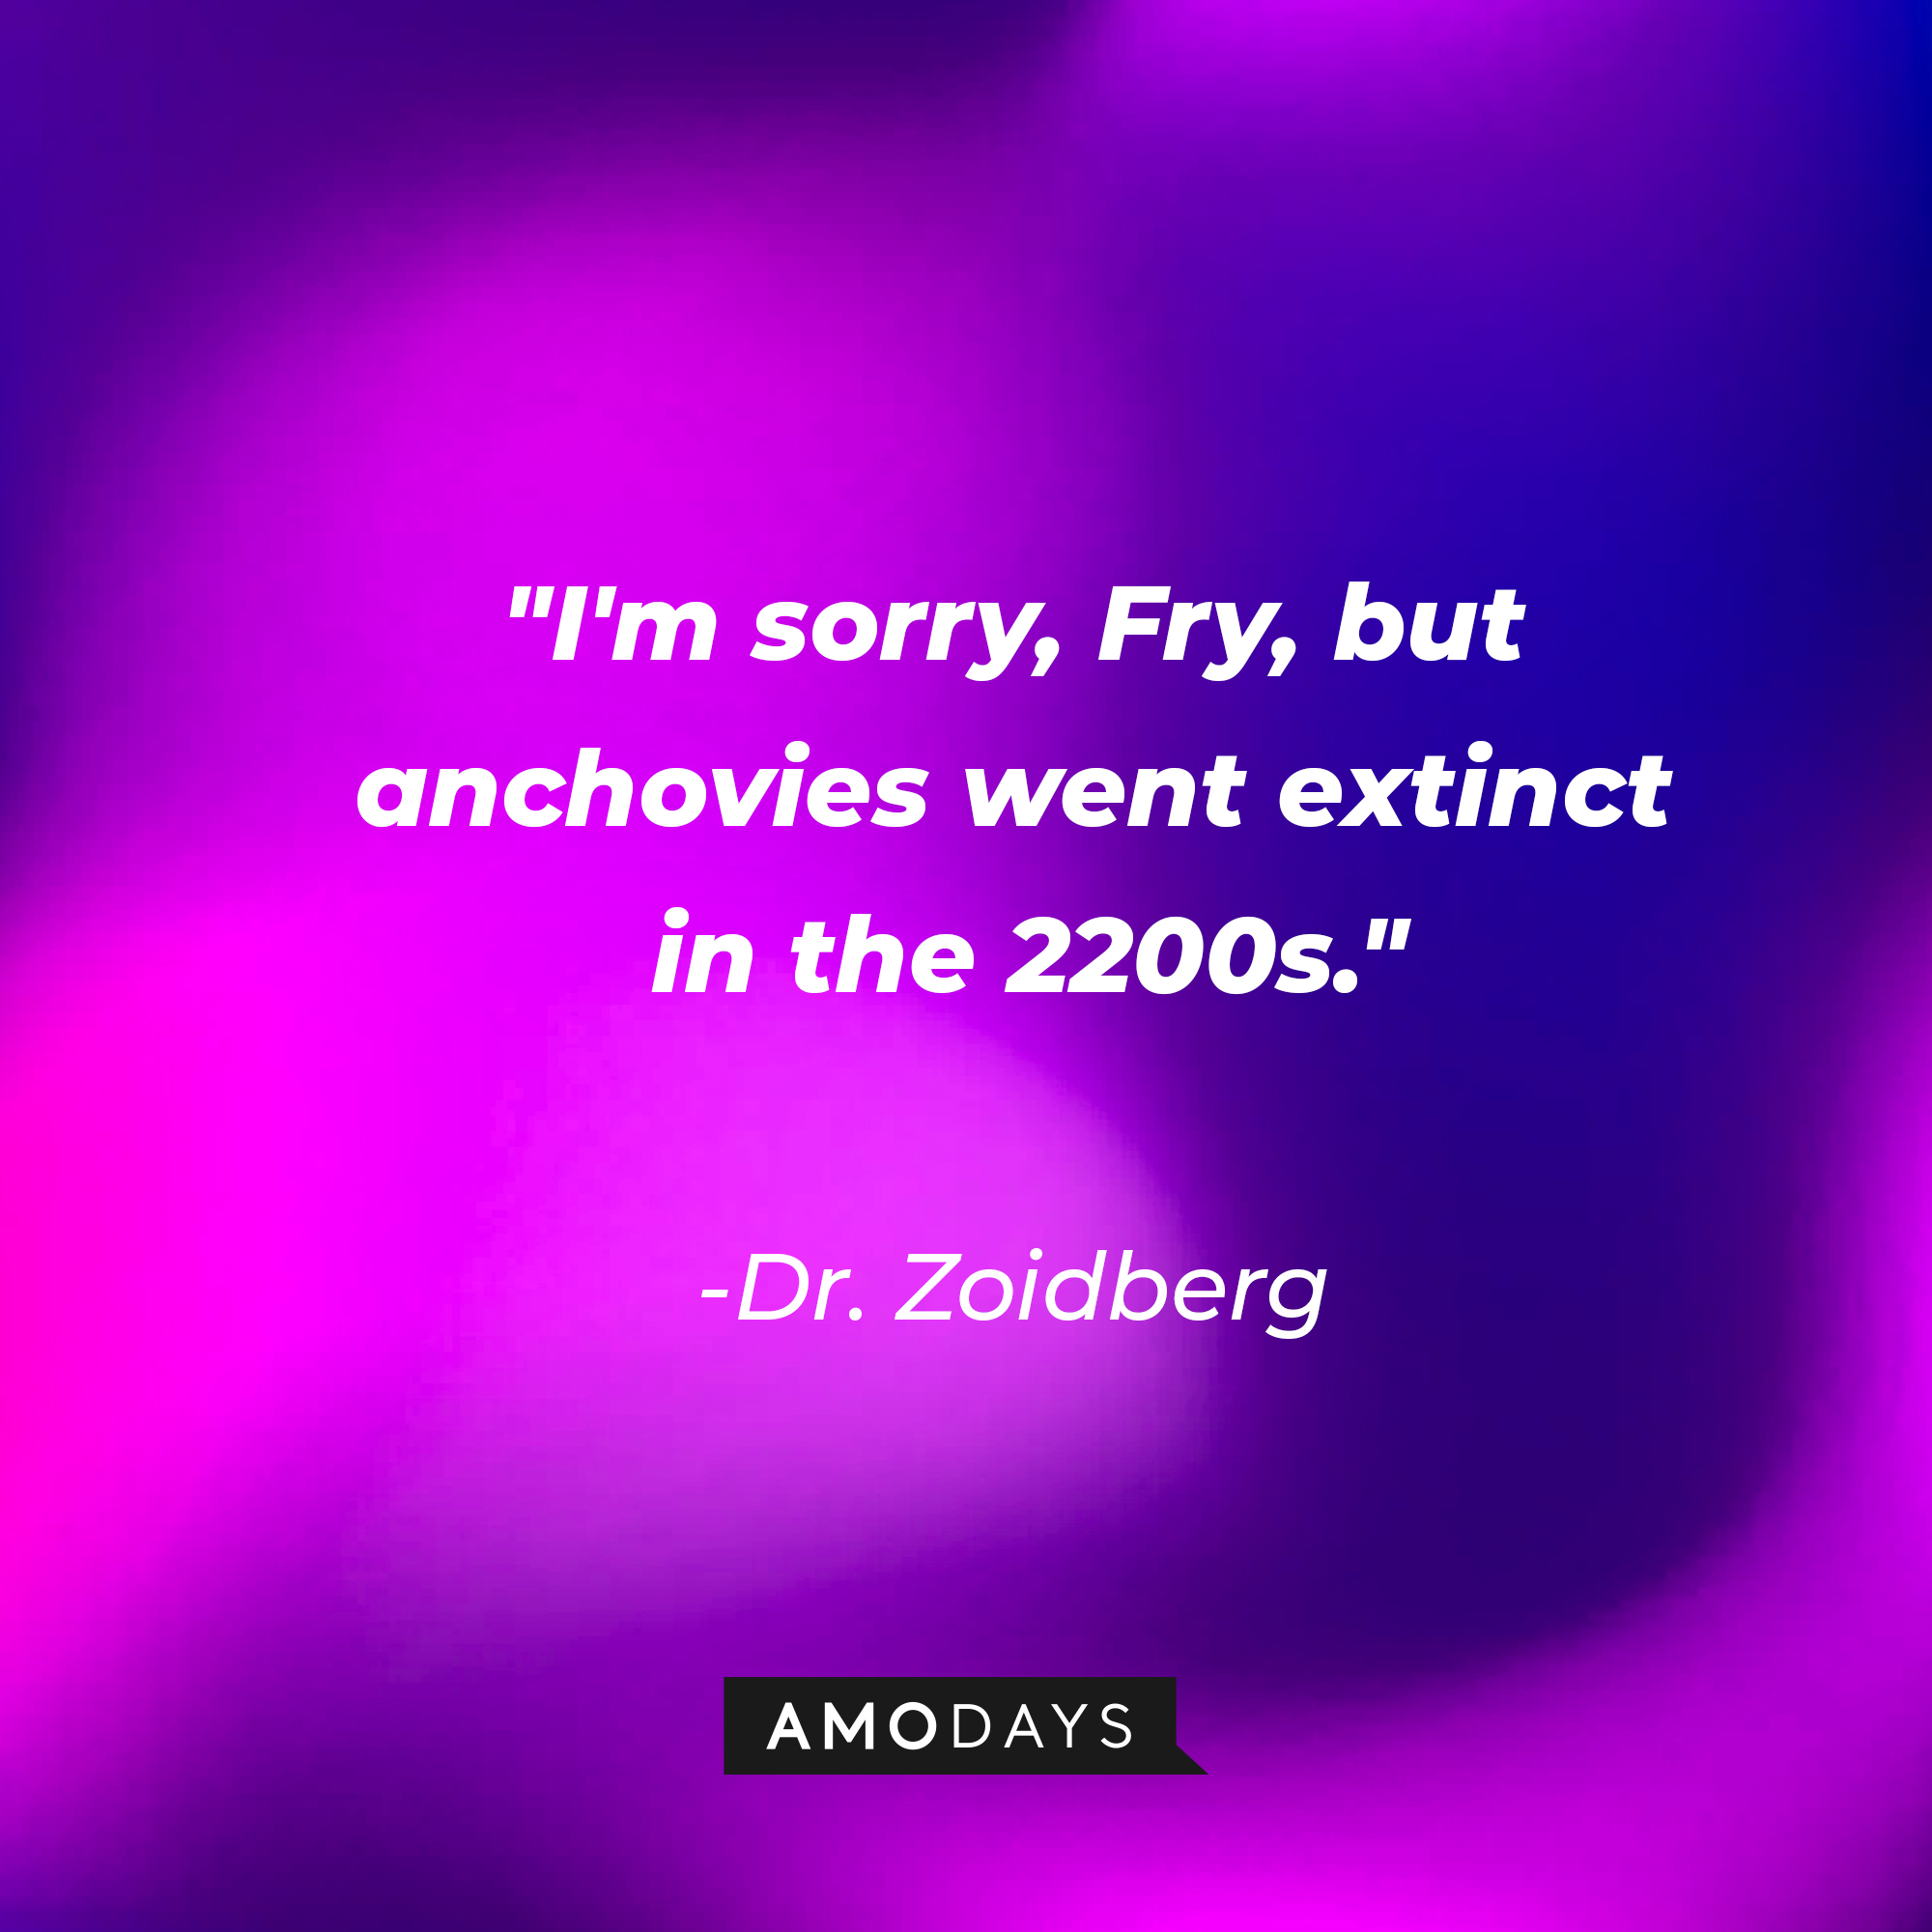 Dr. Zoidberg's quote: "I'm sorry, Fry, but anchovies went extinct in the 2200s." | Source: AmoDays